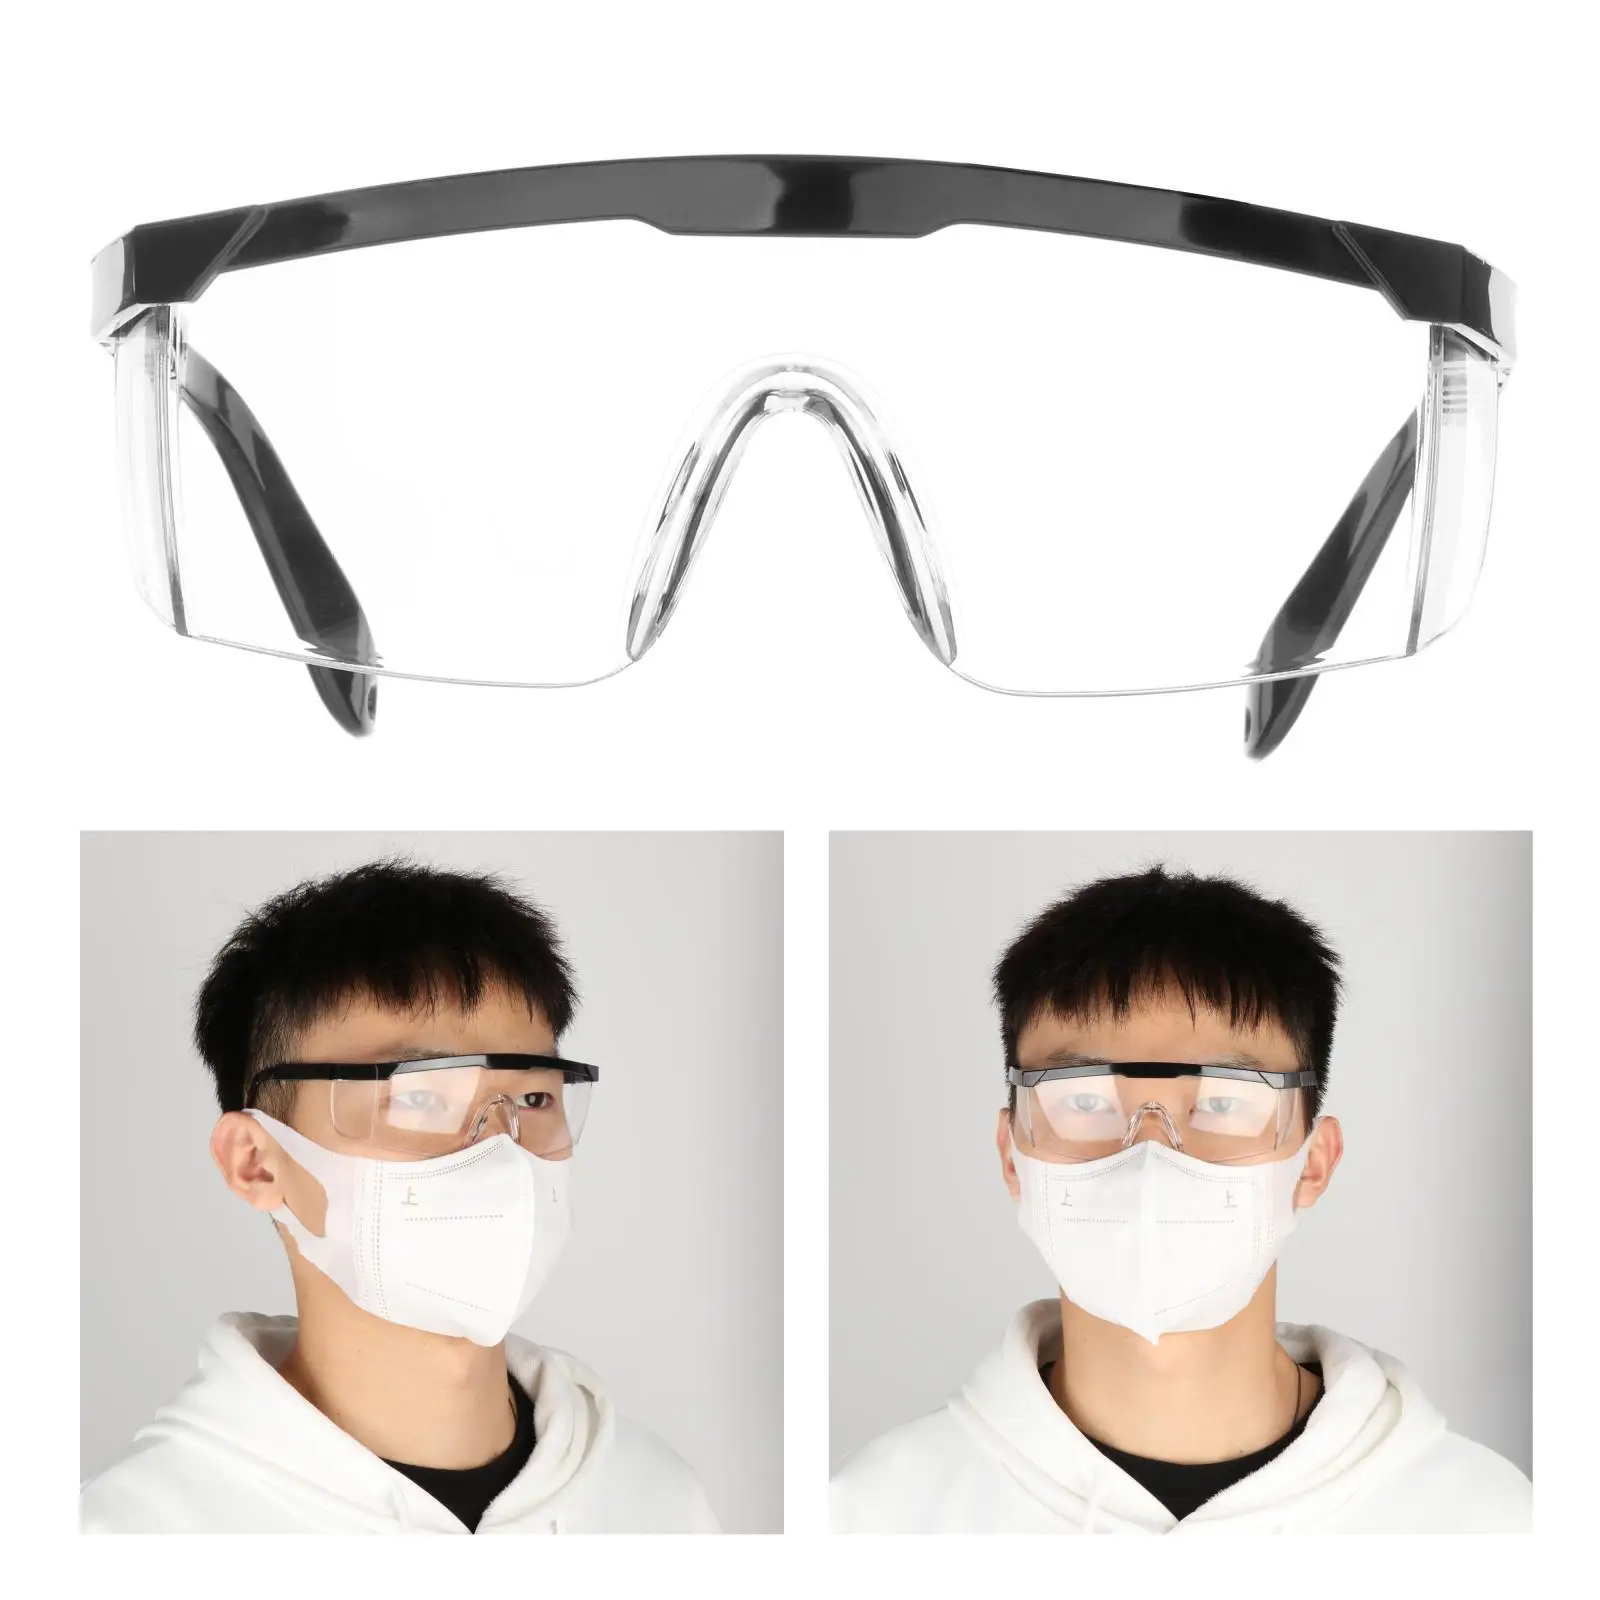 Anti Fog Safety Goggles Glasses Transparent PC Lens Eyewear Eyeglasses Scratchproof for Laboratory Work Outdoor Sports Drilling